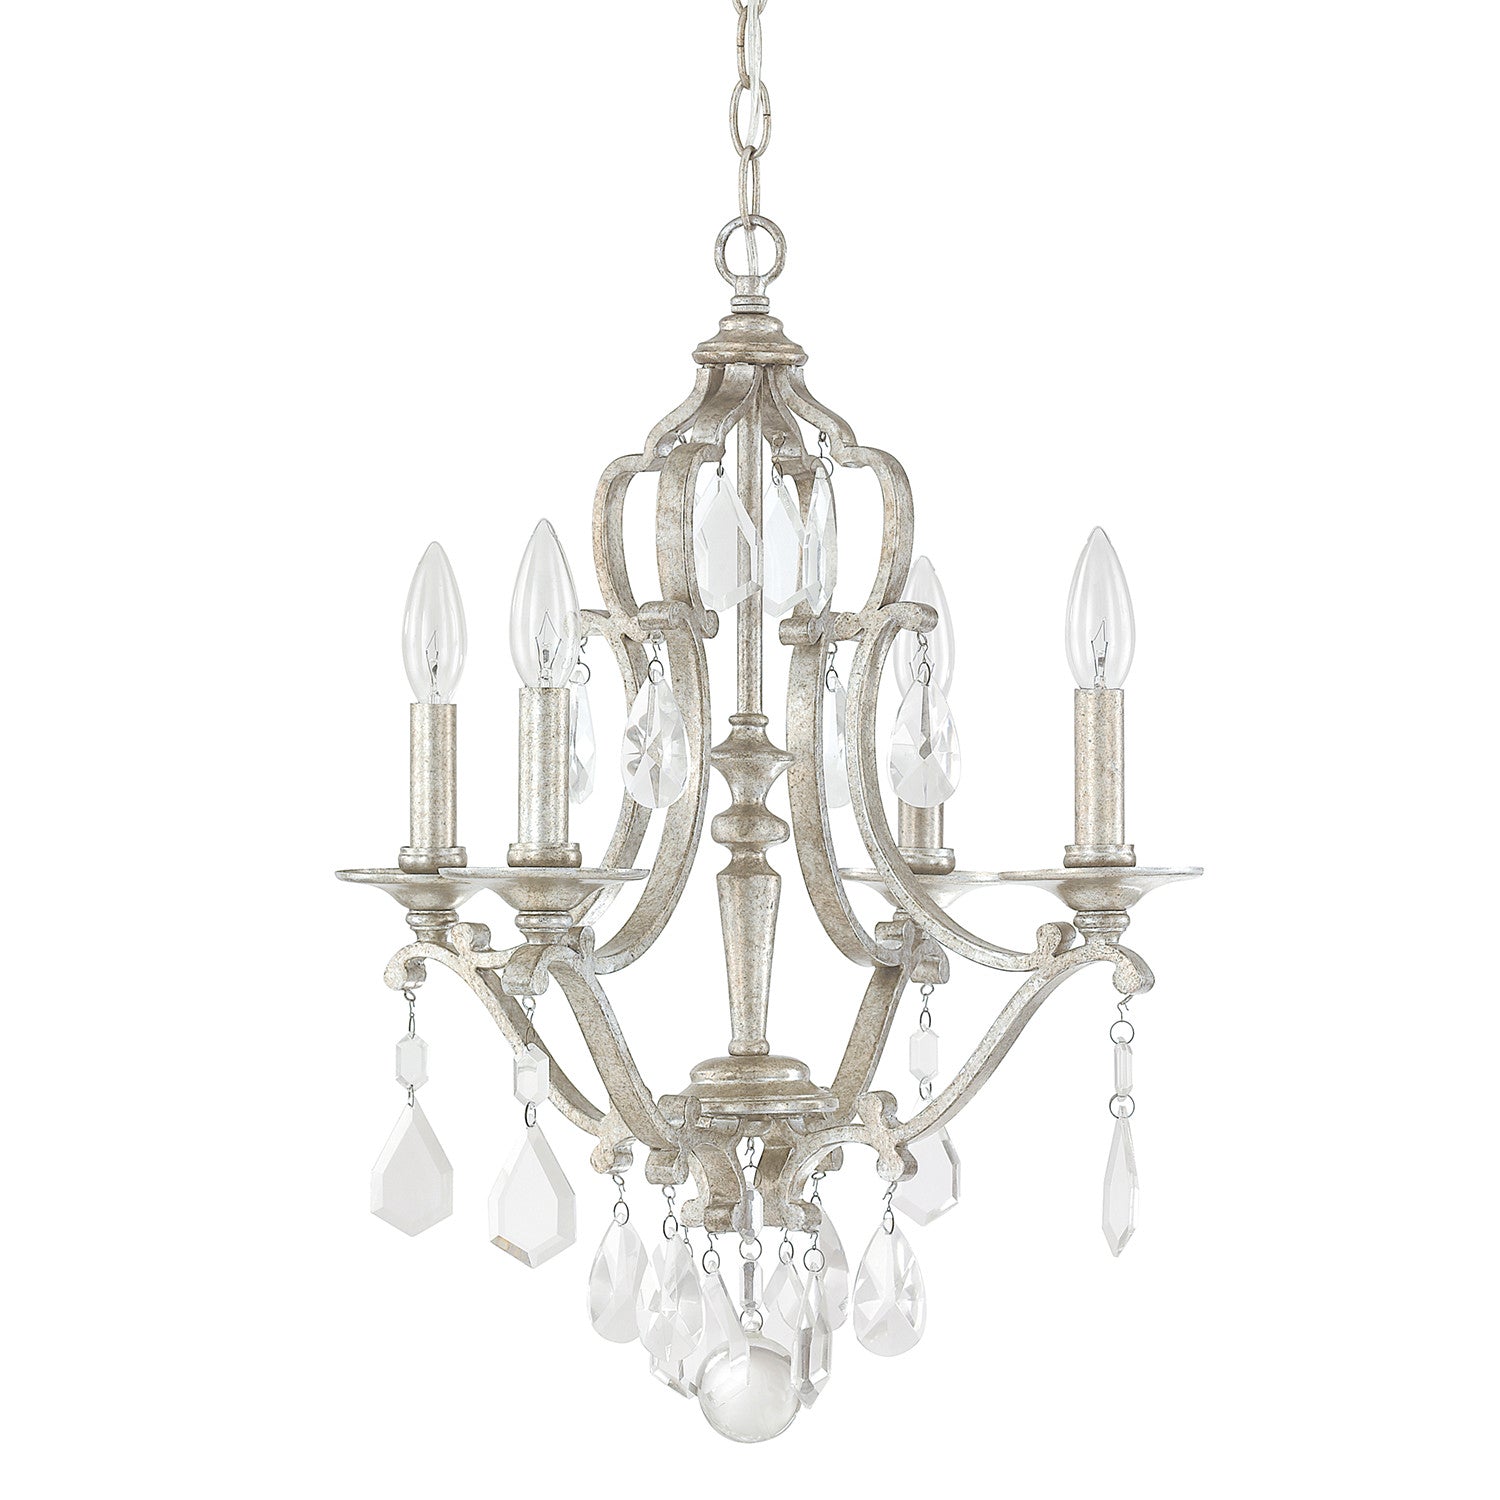 Capital Blakely 4184AS-CR Chandelier Light - Antique Silver